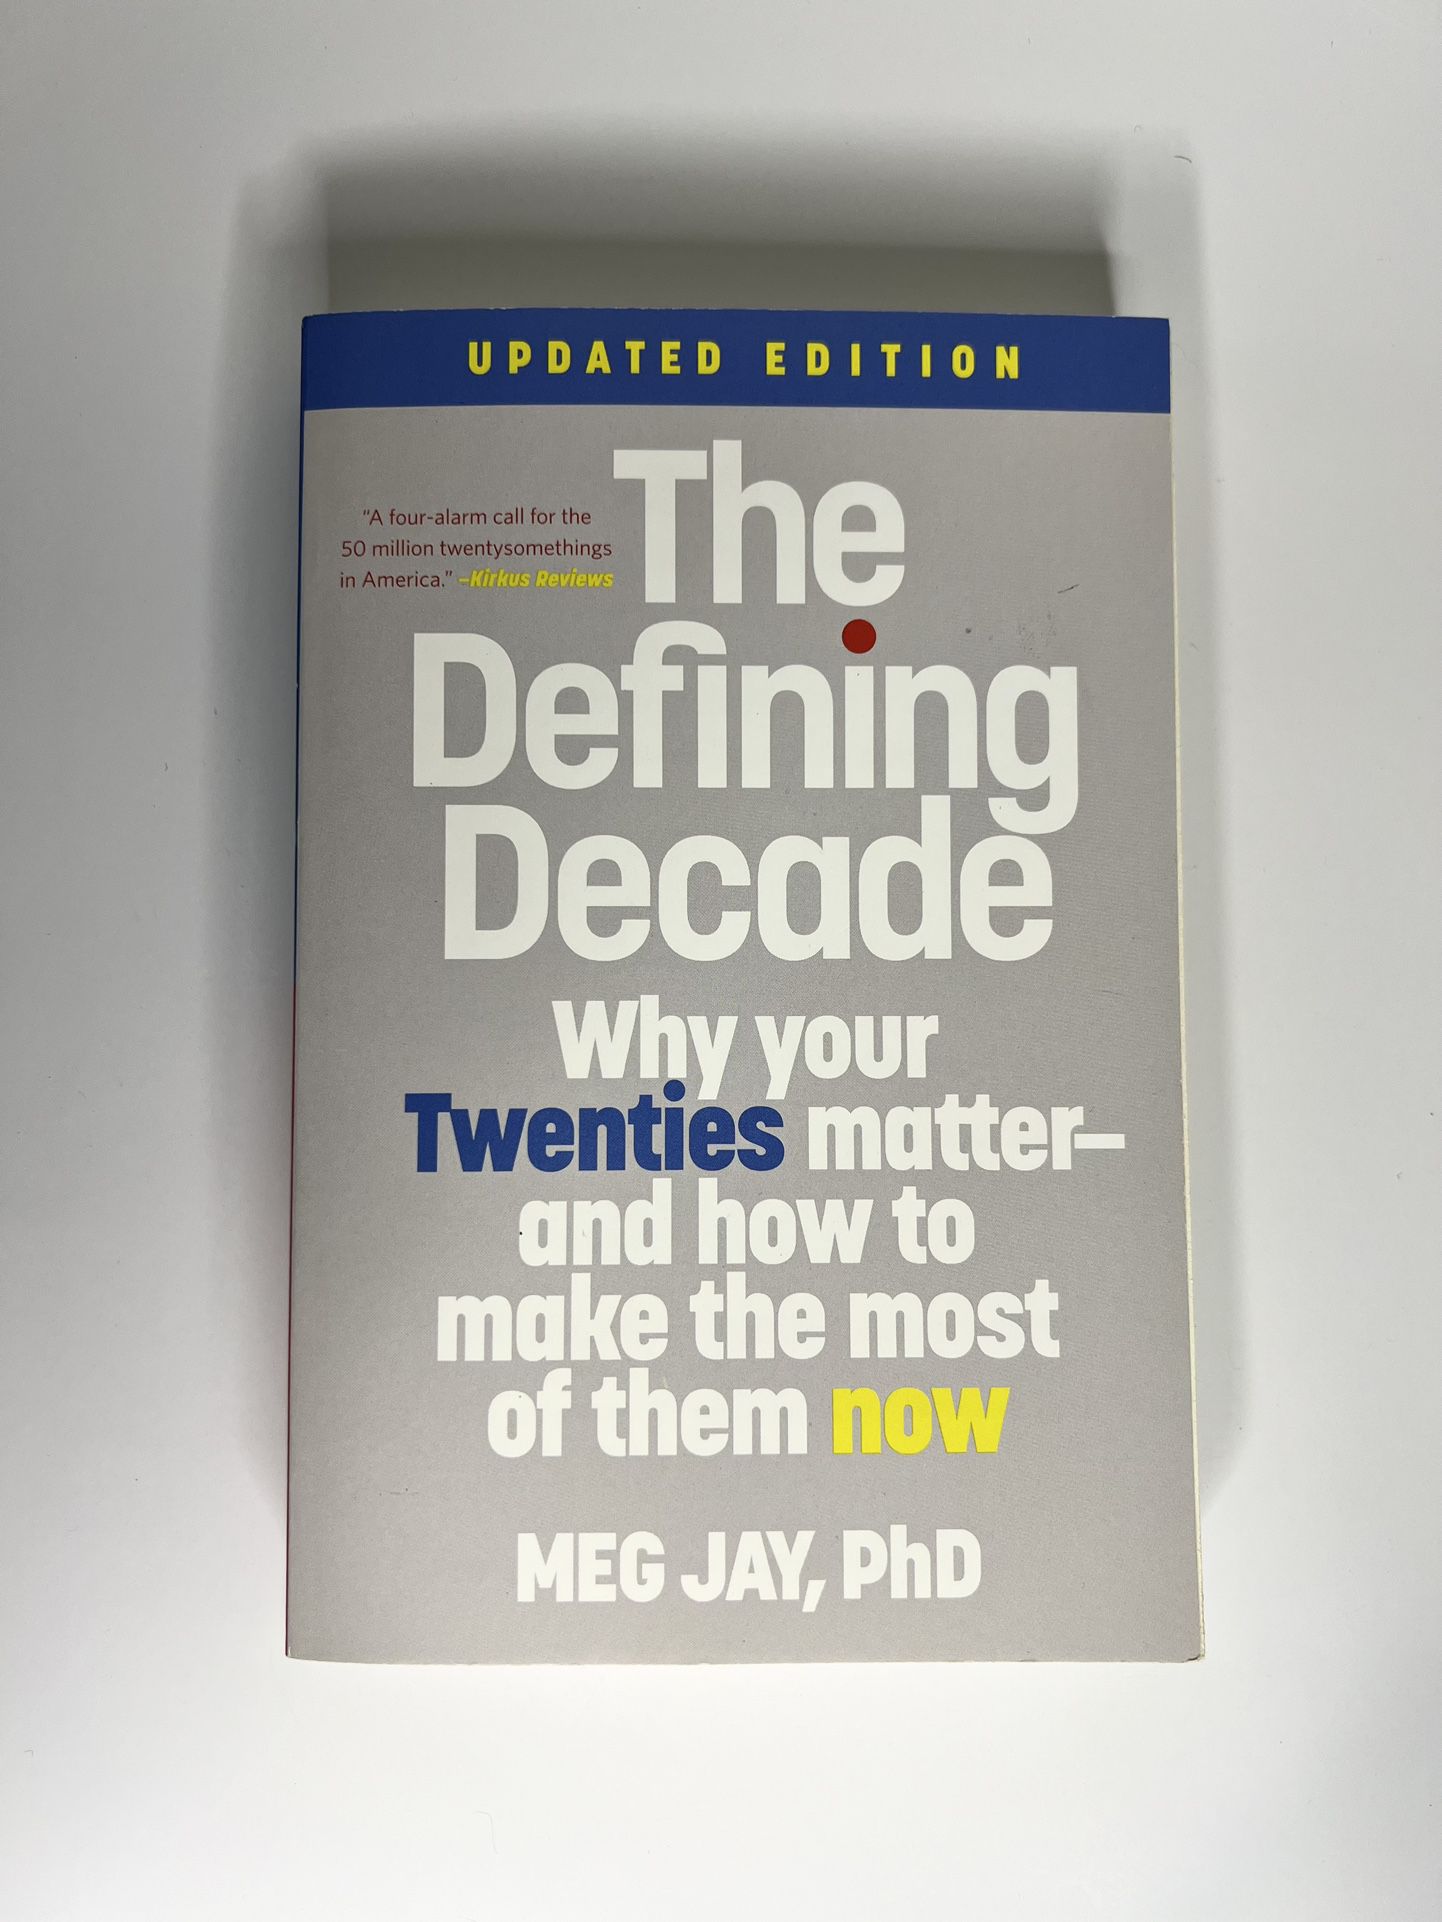 The Defining Decade: Why Your Twenties Matter And How To Make The Most Of Them Now